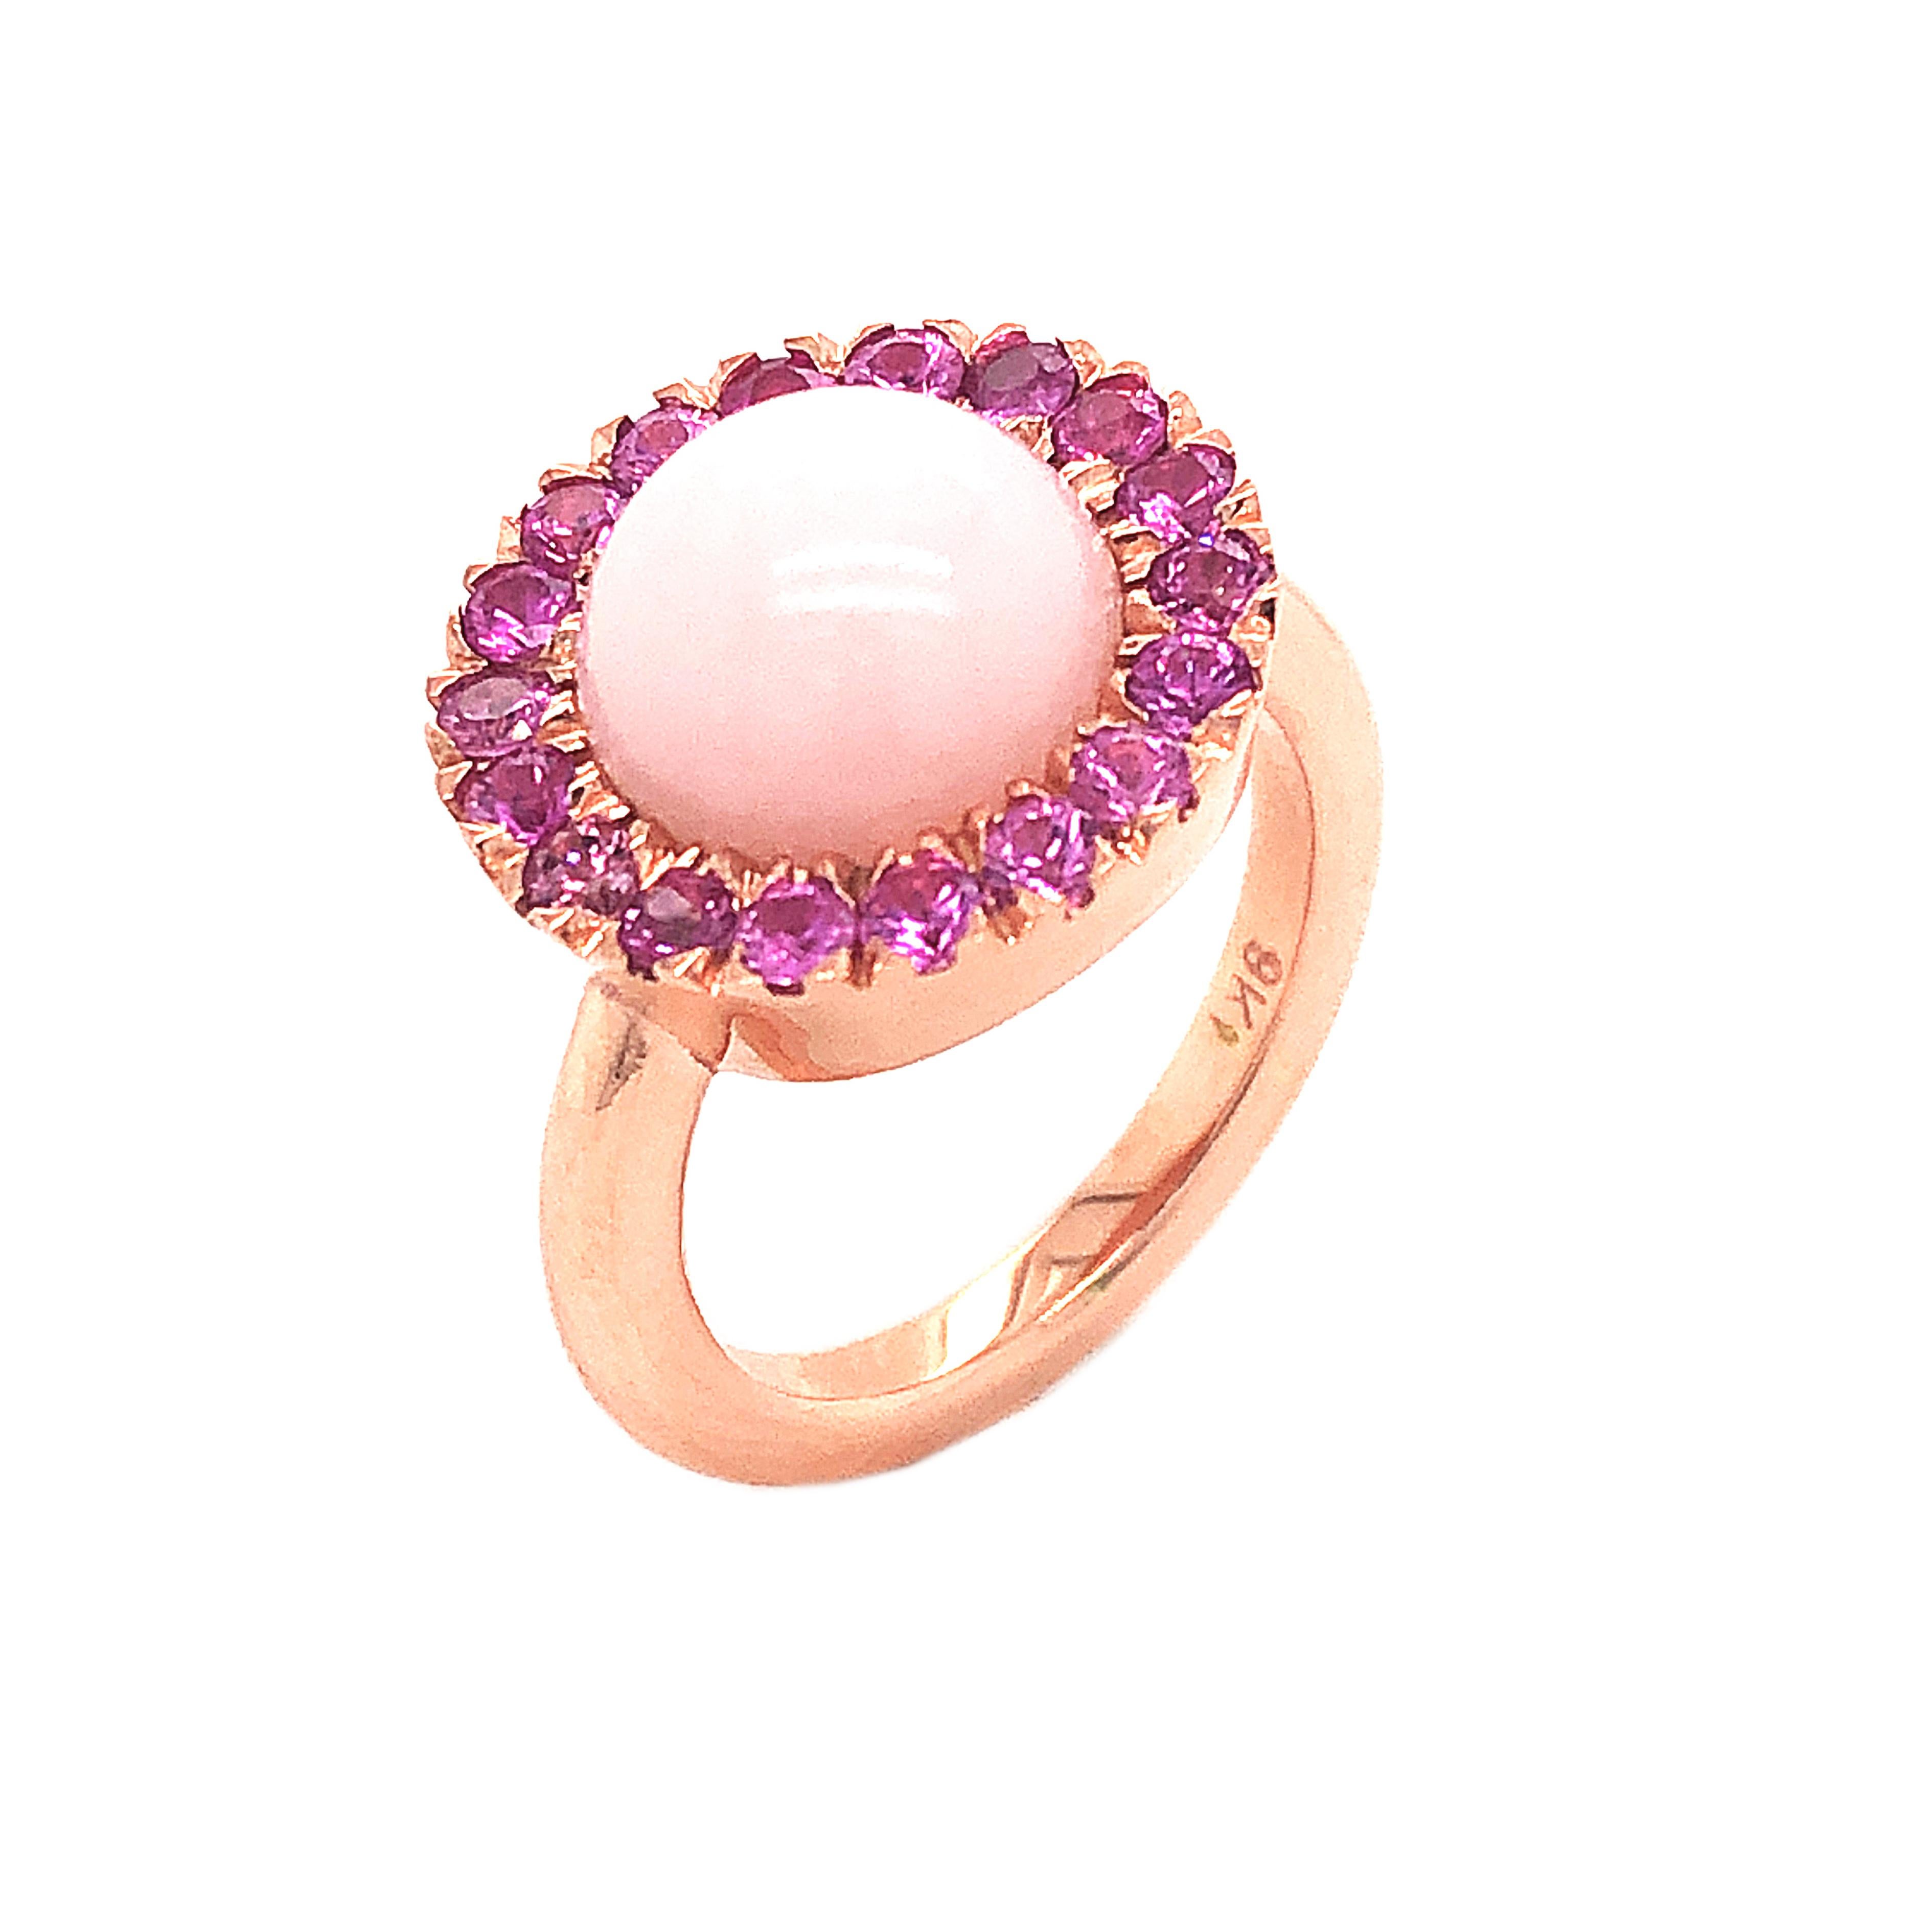 Chic, Unique yet Timeless Contemporary Cocktail Ring featuring a Natural 4.2Kt Rose Opal Round Cabochon surrounded by 1.35Kt Natural Vivid Pink Sapphire in an elegant Rose Gold Setting: a Stunning, Magical Piece.
In our smart Burgundy Leather Box